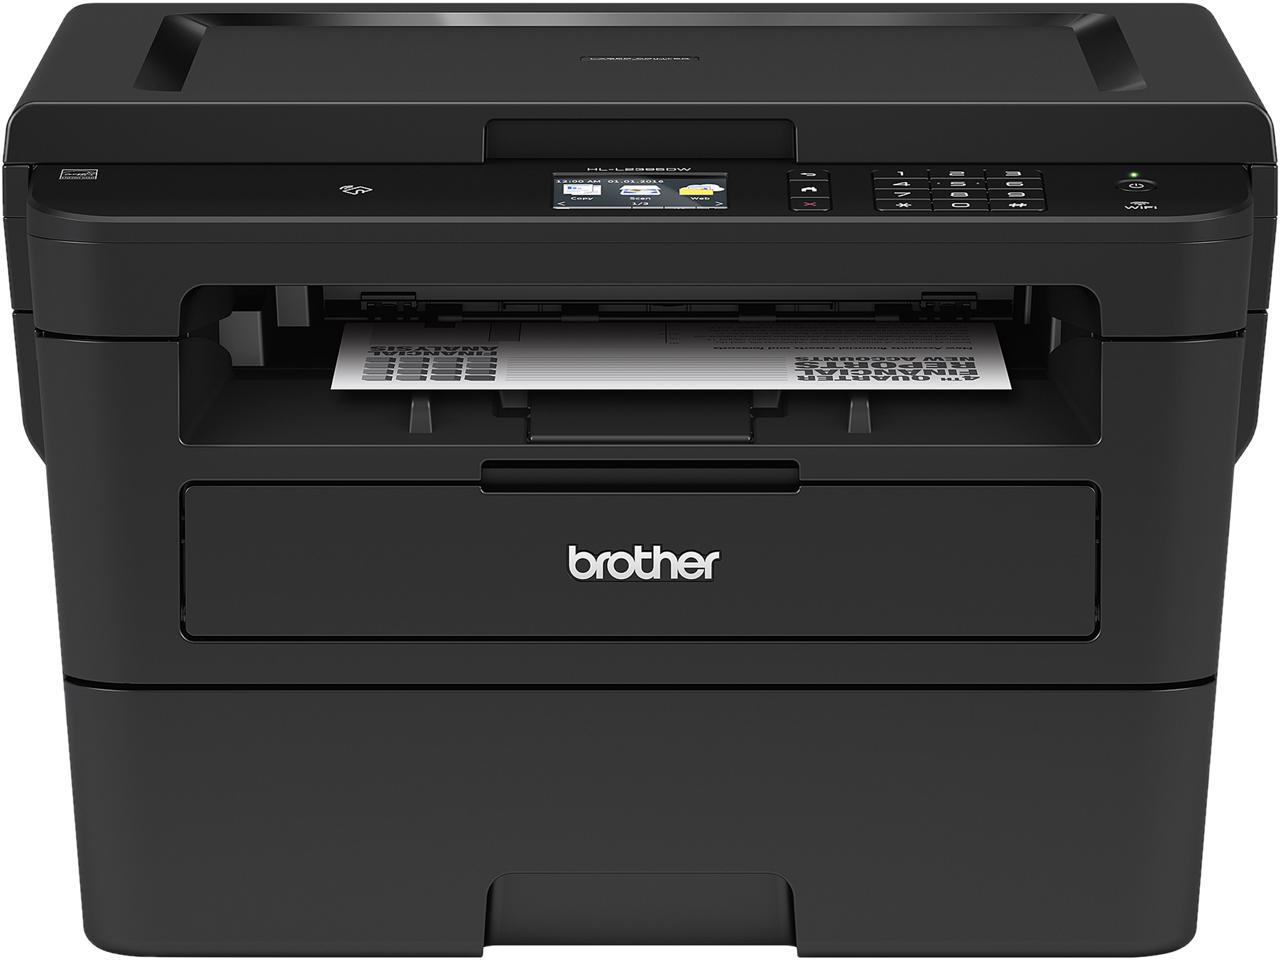 Brother HL-L2395DW Compact Monochrome Laser Printer w/ Flatbed Copy & Scan, Wireless Printing, NFC and Cloud-Based Printing & Scanning